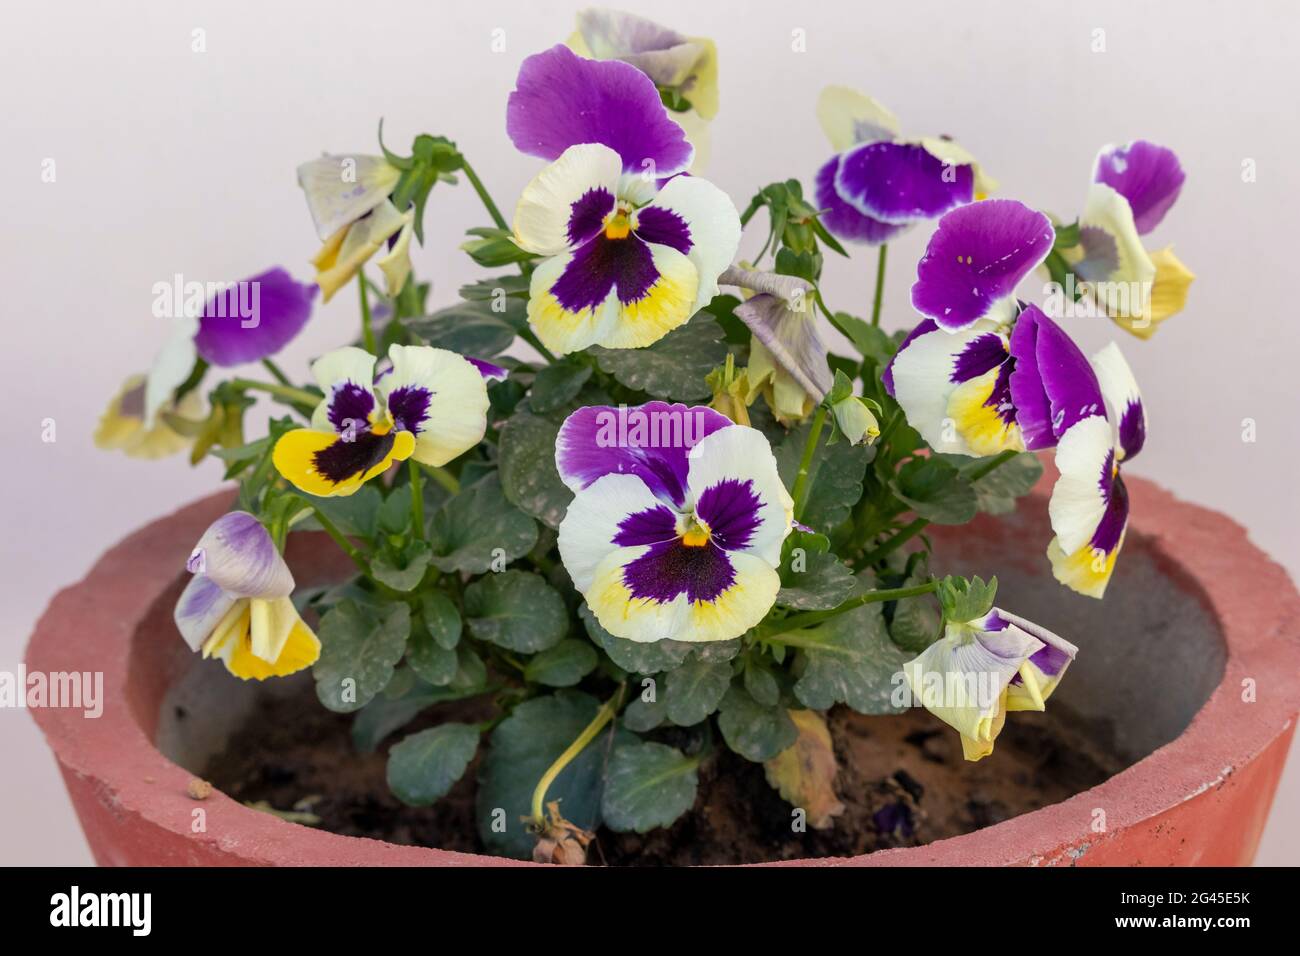 A plant full with beautiful purple white and yellow Garden Pansies (Viola tricolor) flowers on terrace garden. Stock Photo